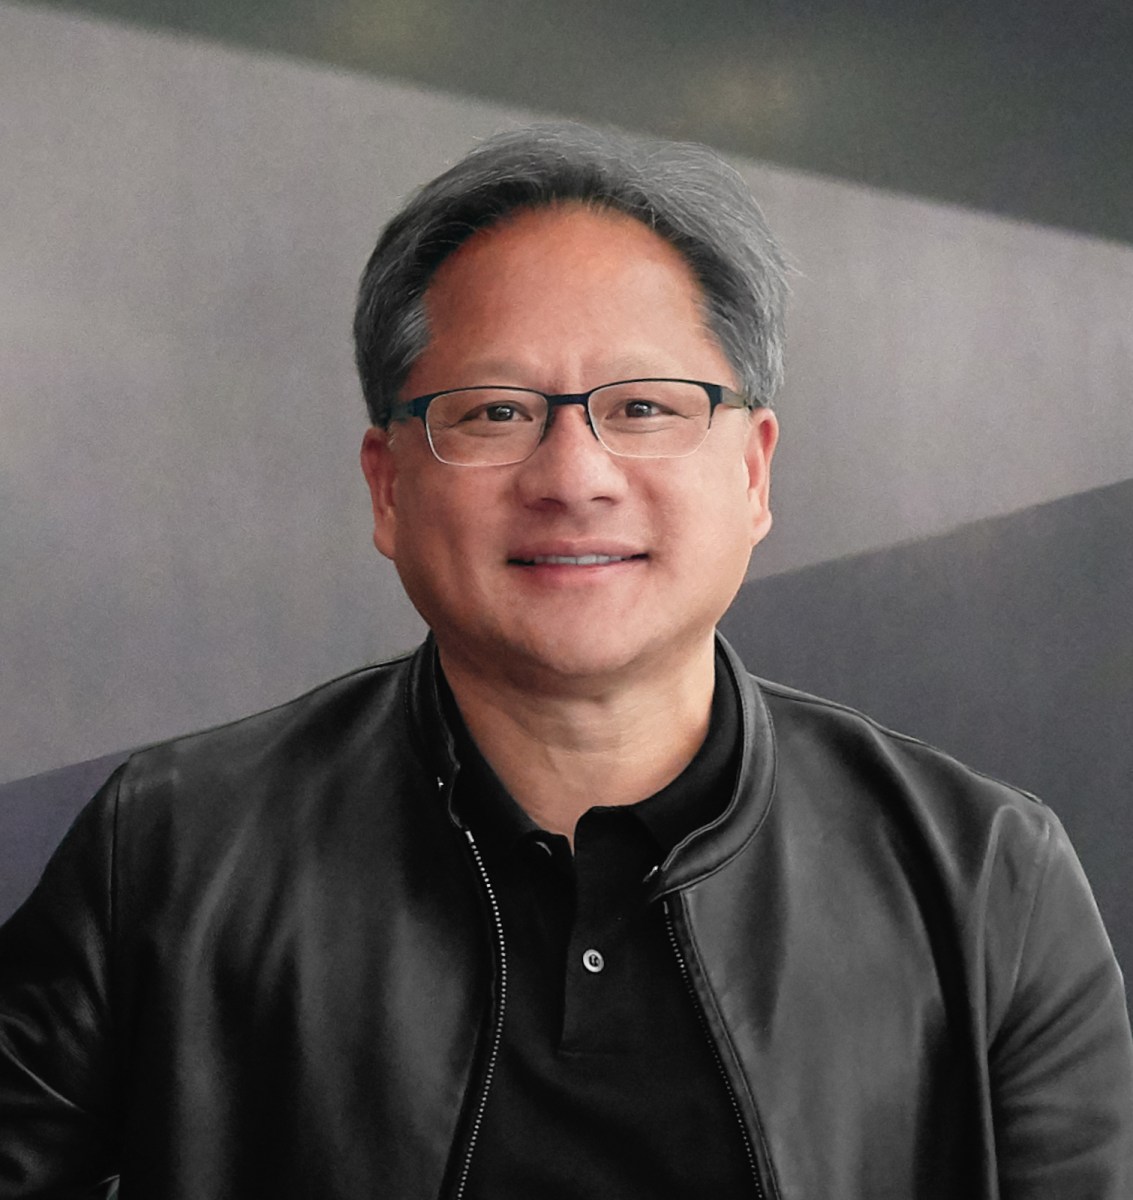 All the Nvidia news announced by Jensen Huang at Computex